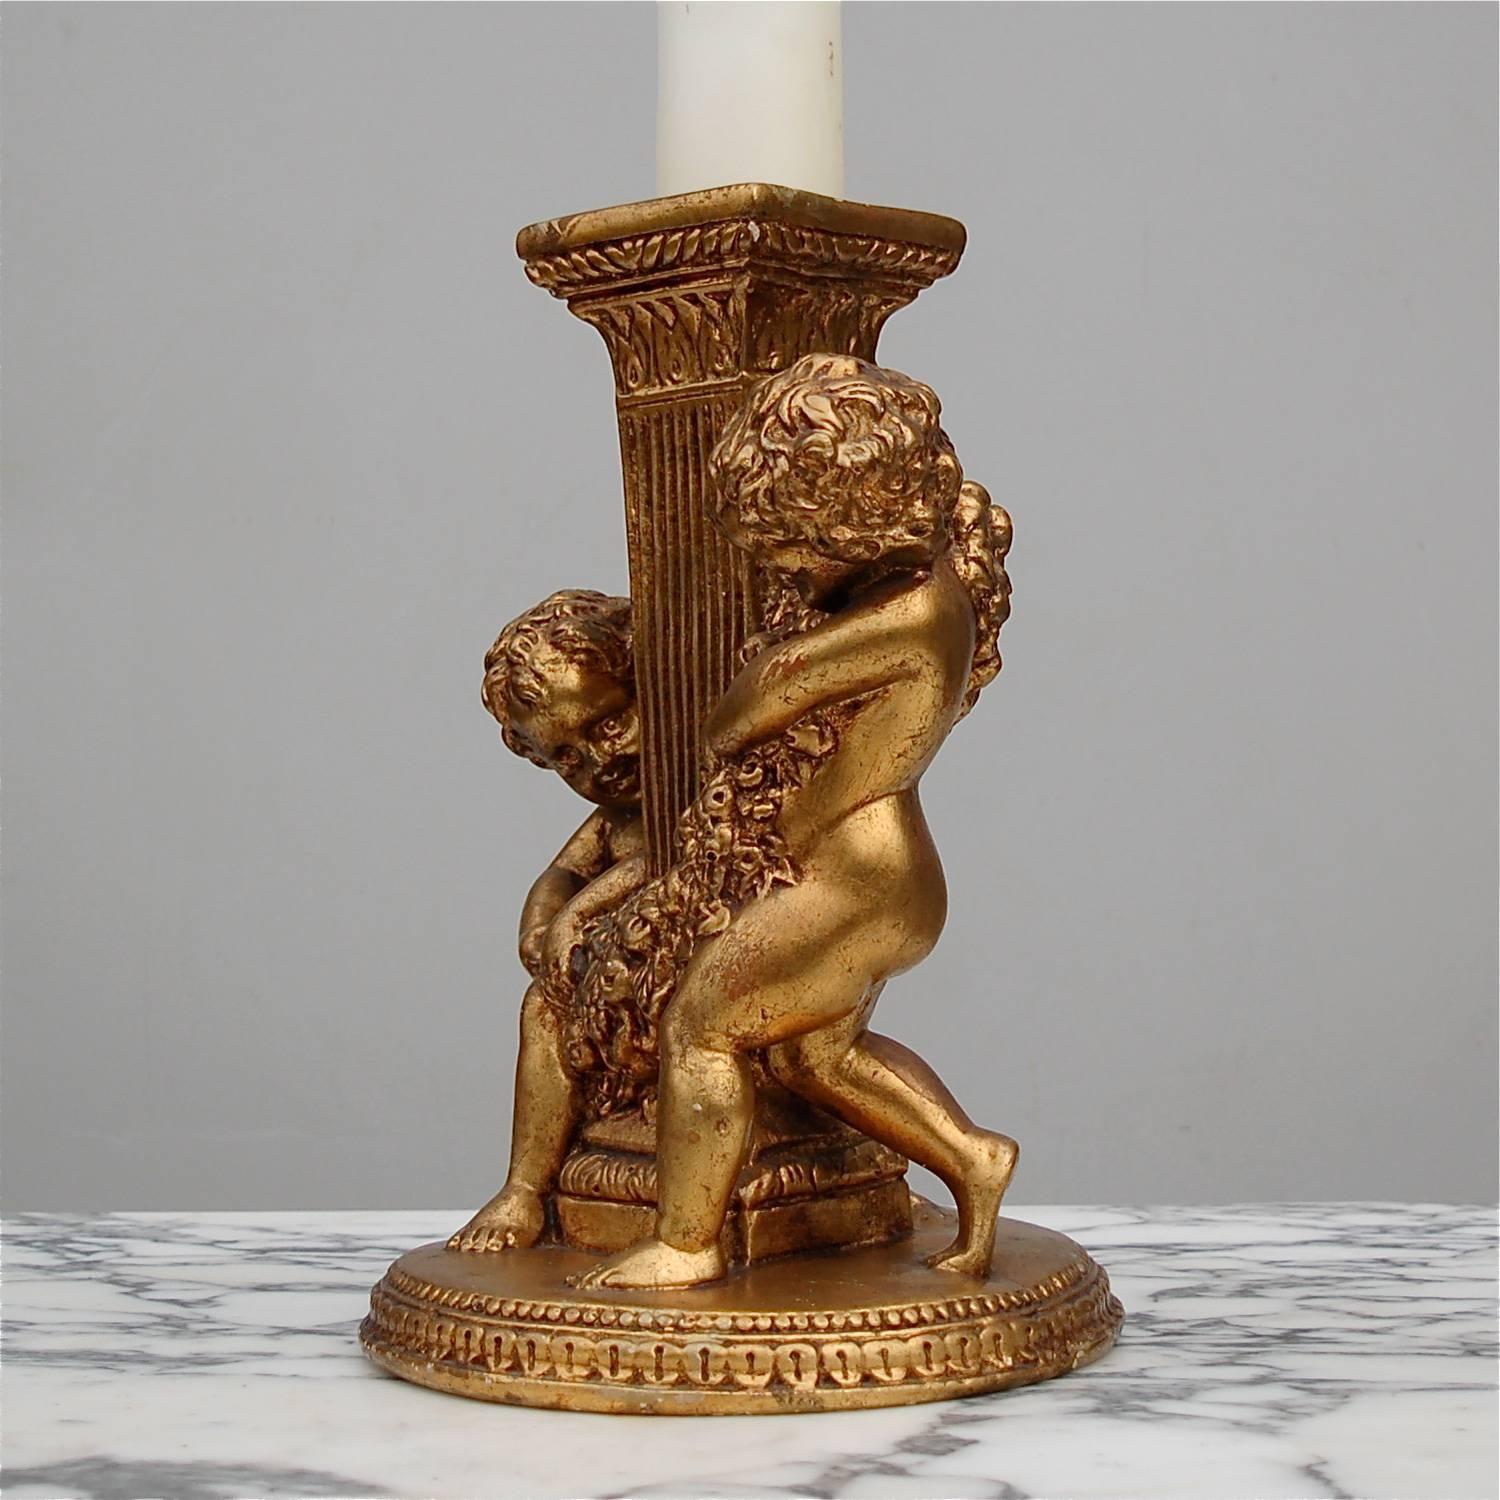 A moulded, gold colored pillar candle holder featuring two adorable little children, resembling cherubs or putti but without the wings. These chubby toddlers are merrily occupied adorning a fluted column with a garland of flowers. This piece has a